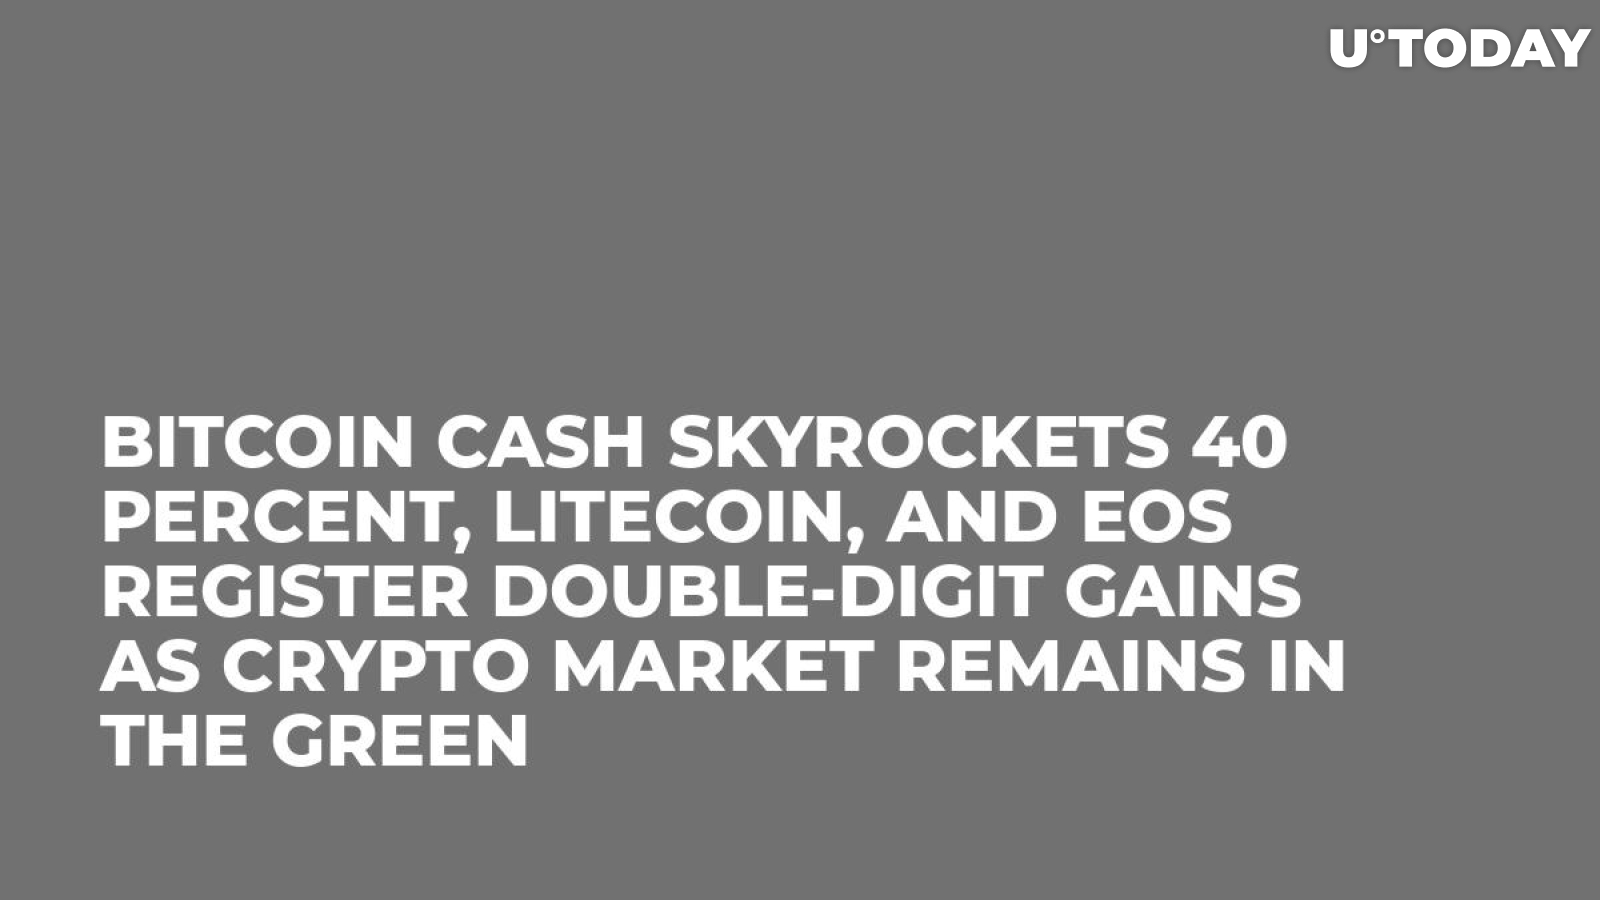 Bitcoin Cash Skyrockets 40 Percent, Litecoin, and EOS Register Double-Digit Gains as Crypto Market Remains in the Green 